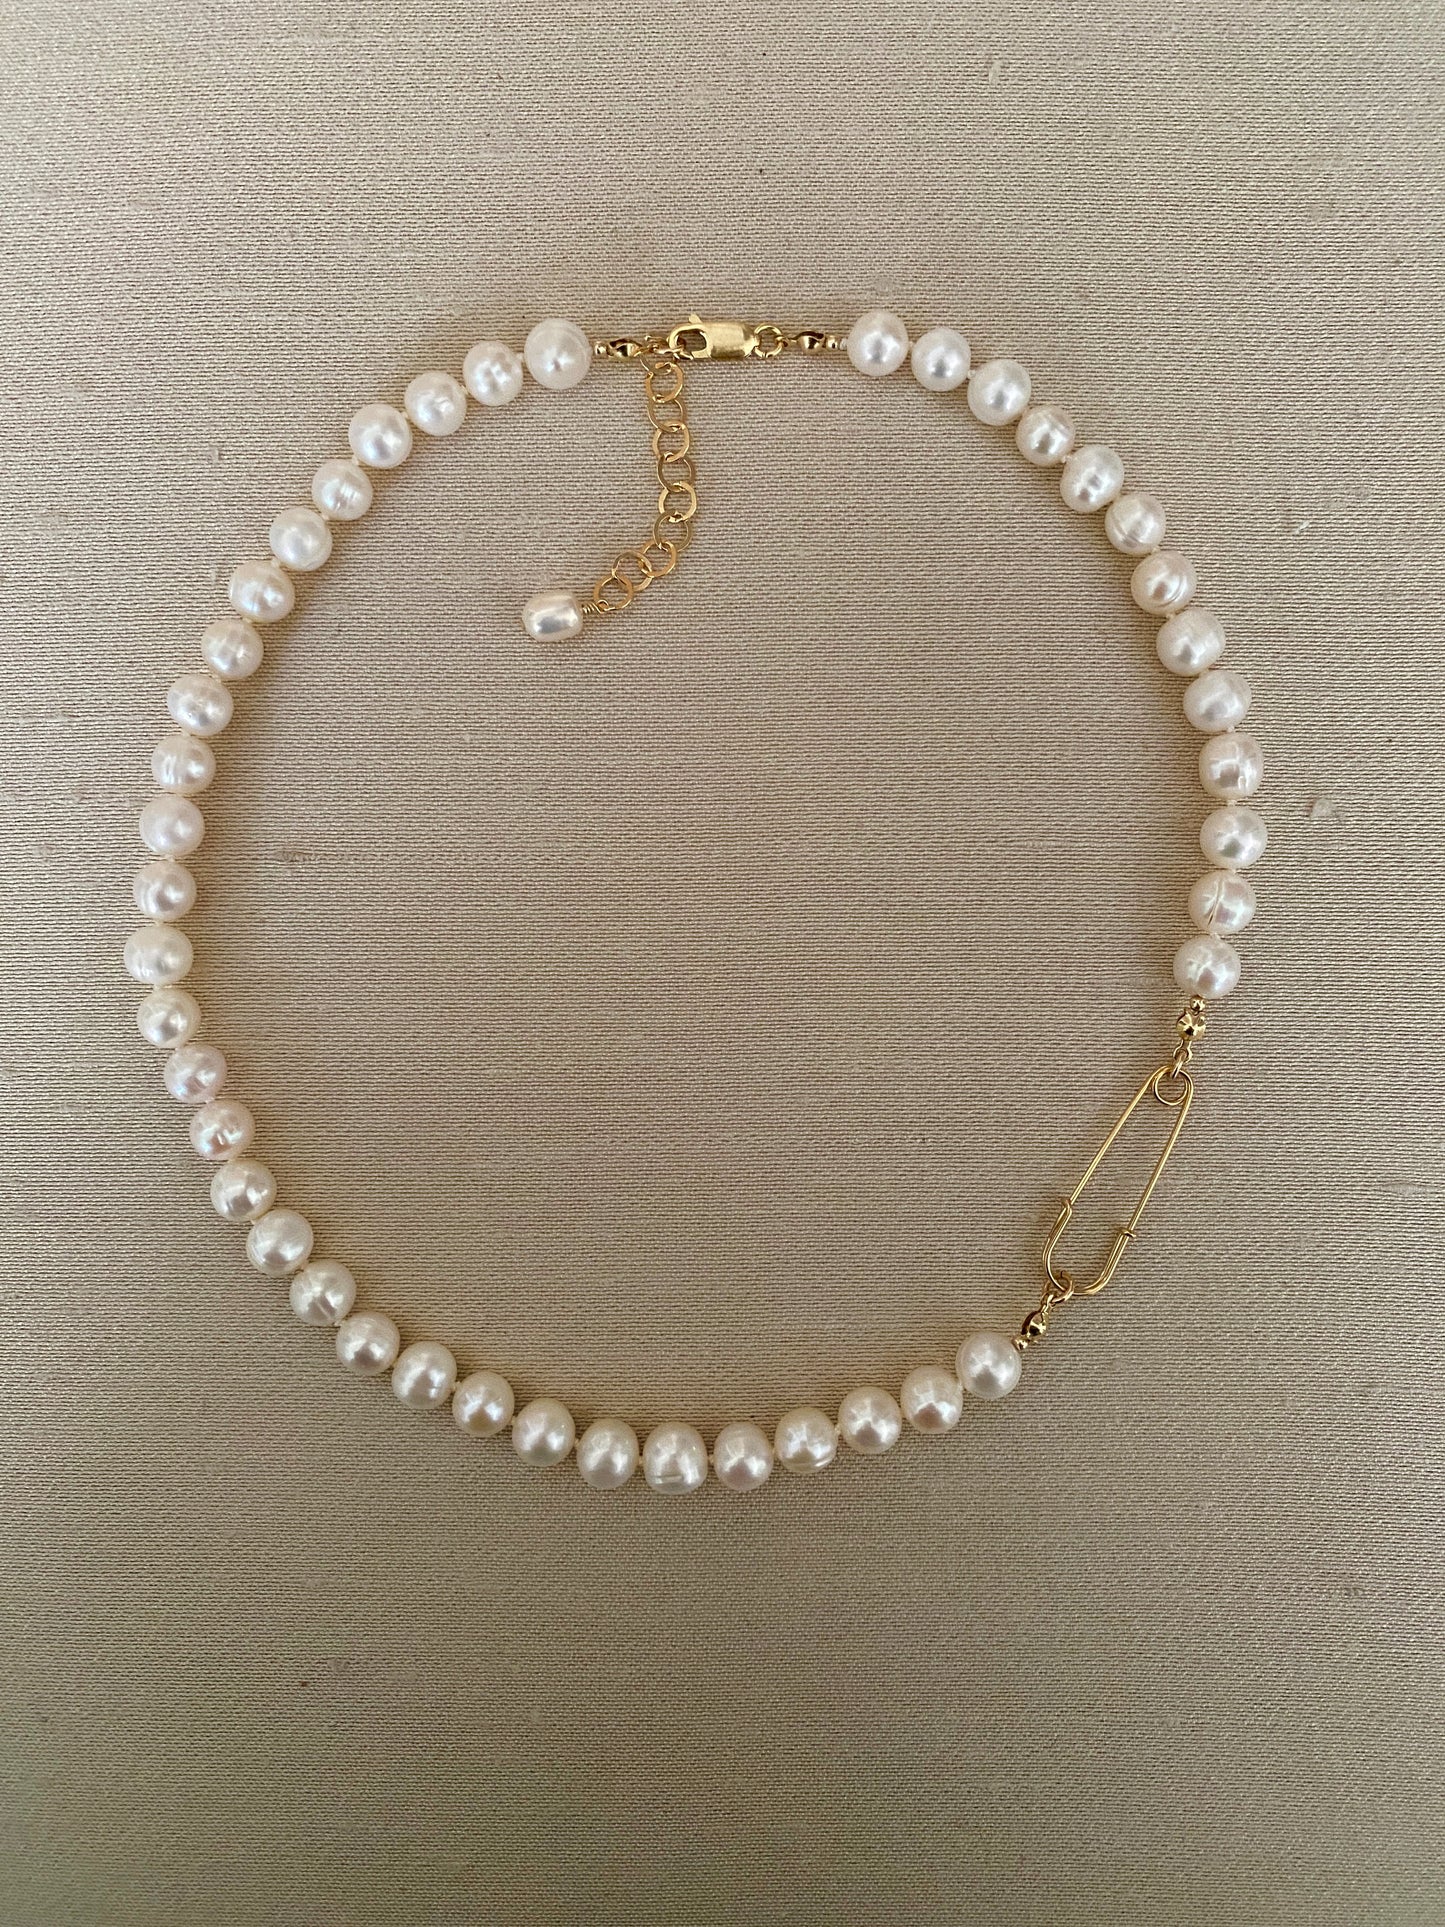 Edgy safety pin Pearl necklace with Baroque Freshwater pearls in 14KT Goldfilled.